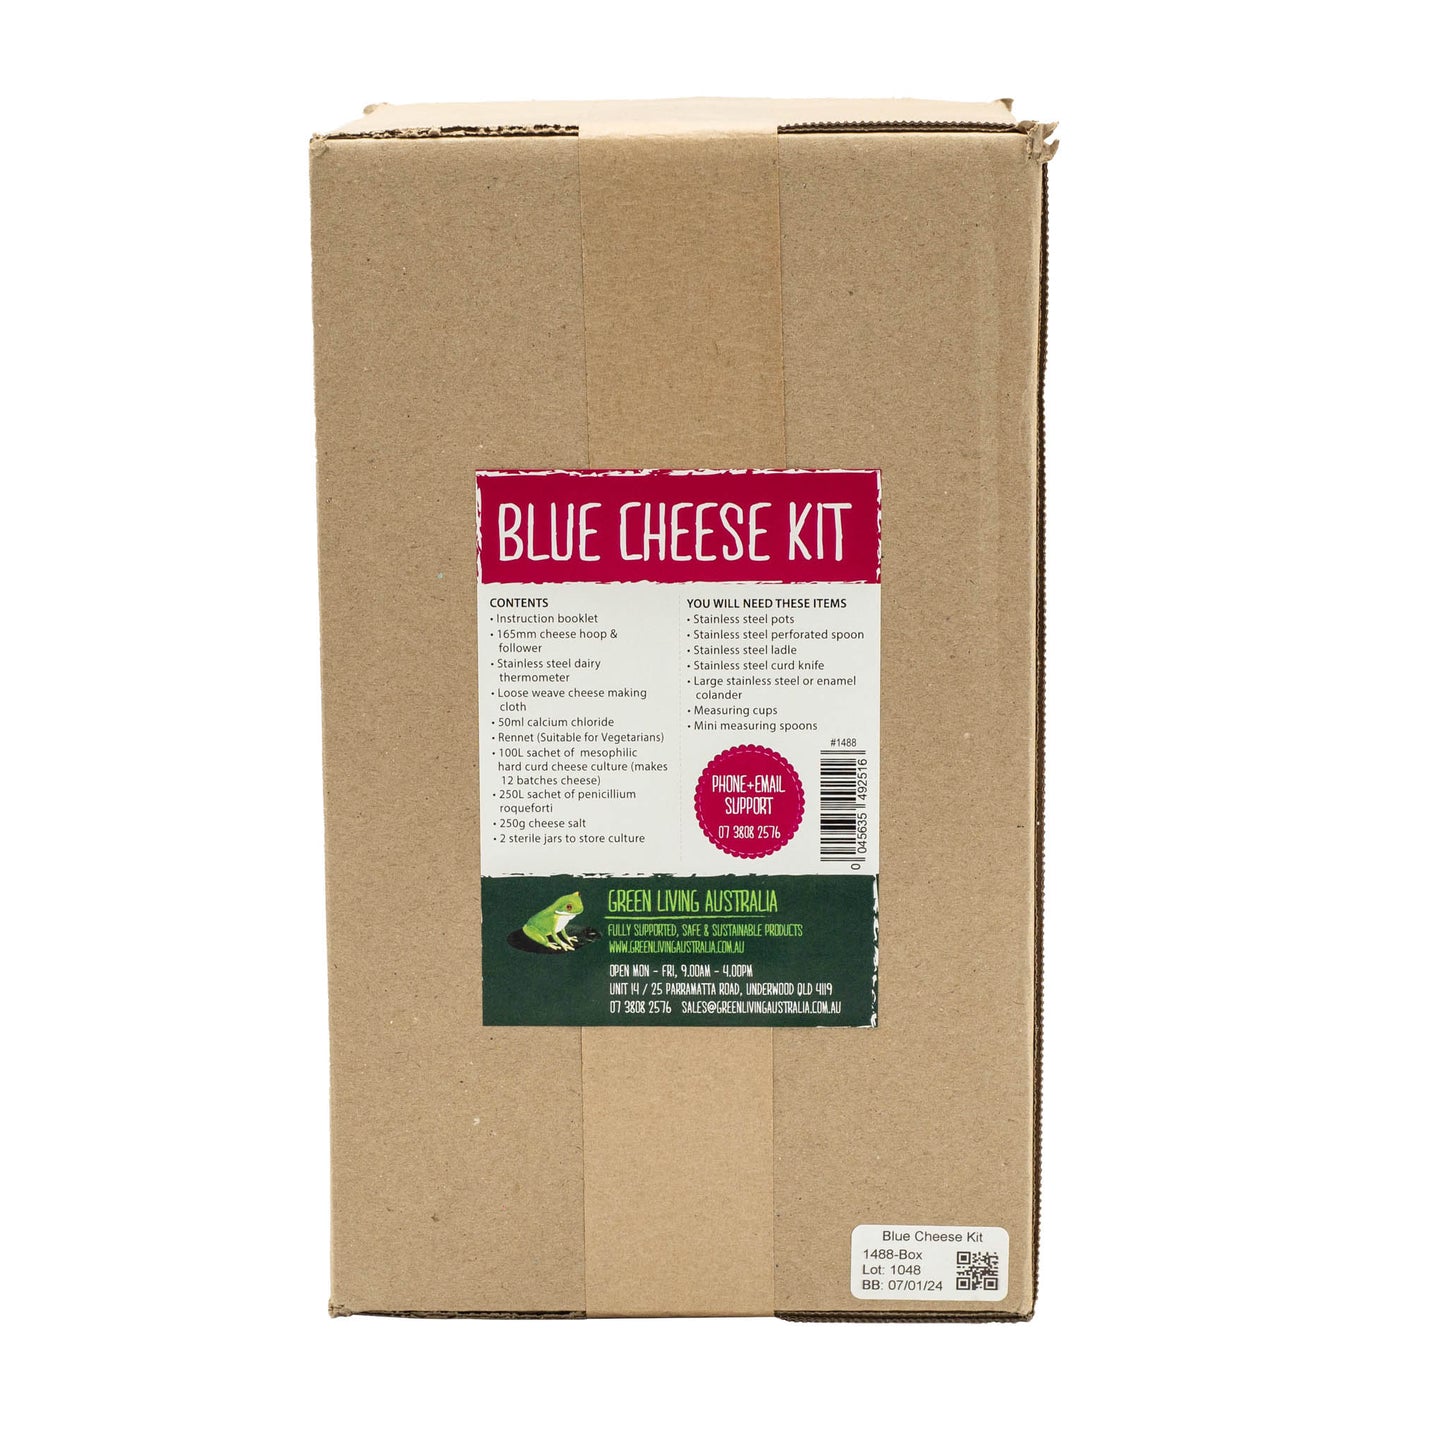 Blue cheese making kit contents and instructions